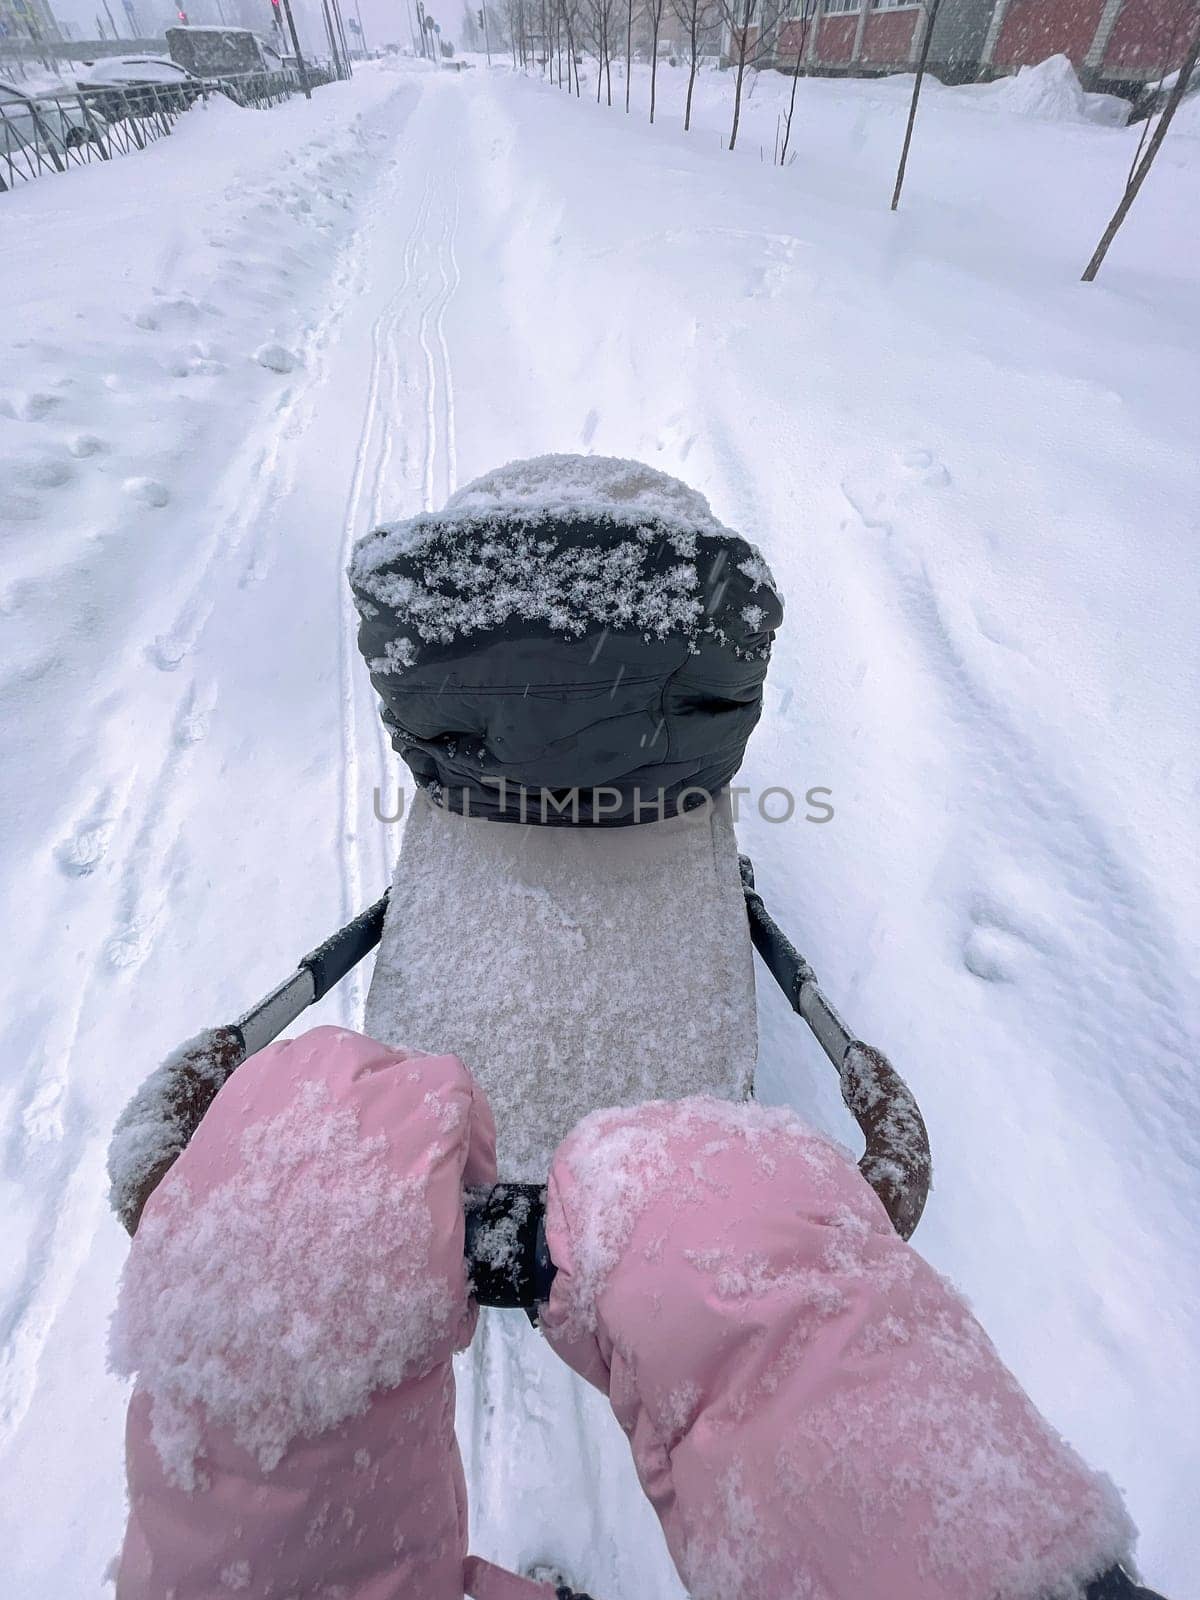 Wintry Walk: A Fathers Journey With Child in Snowy Silence. Vertical photo by darksoul72